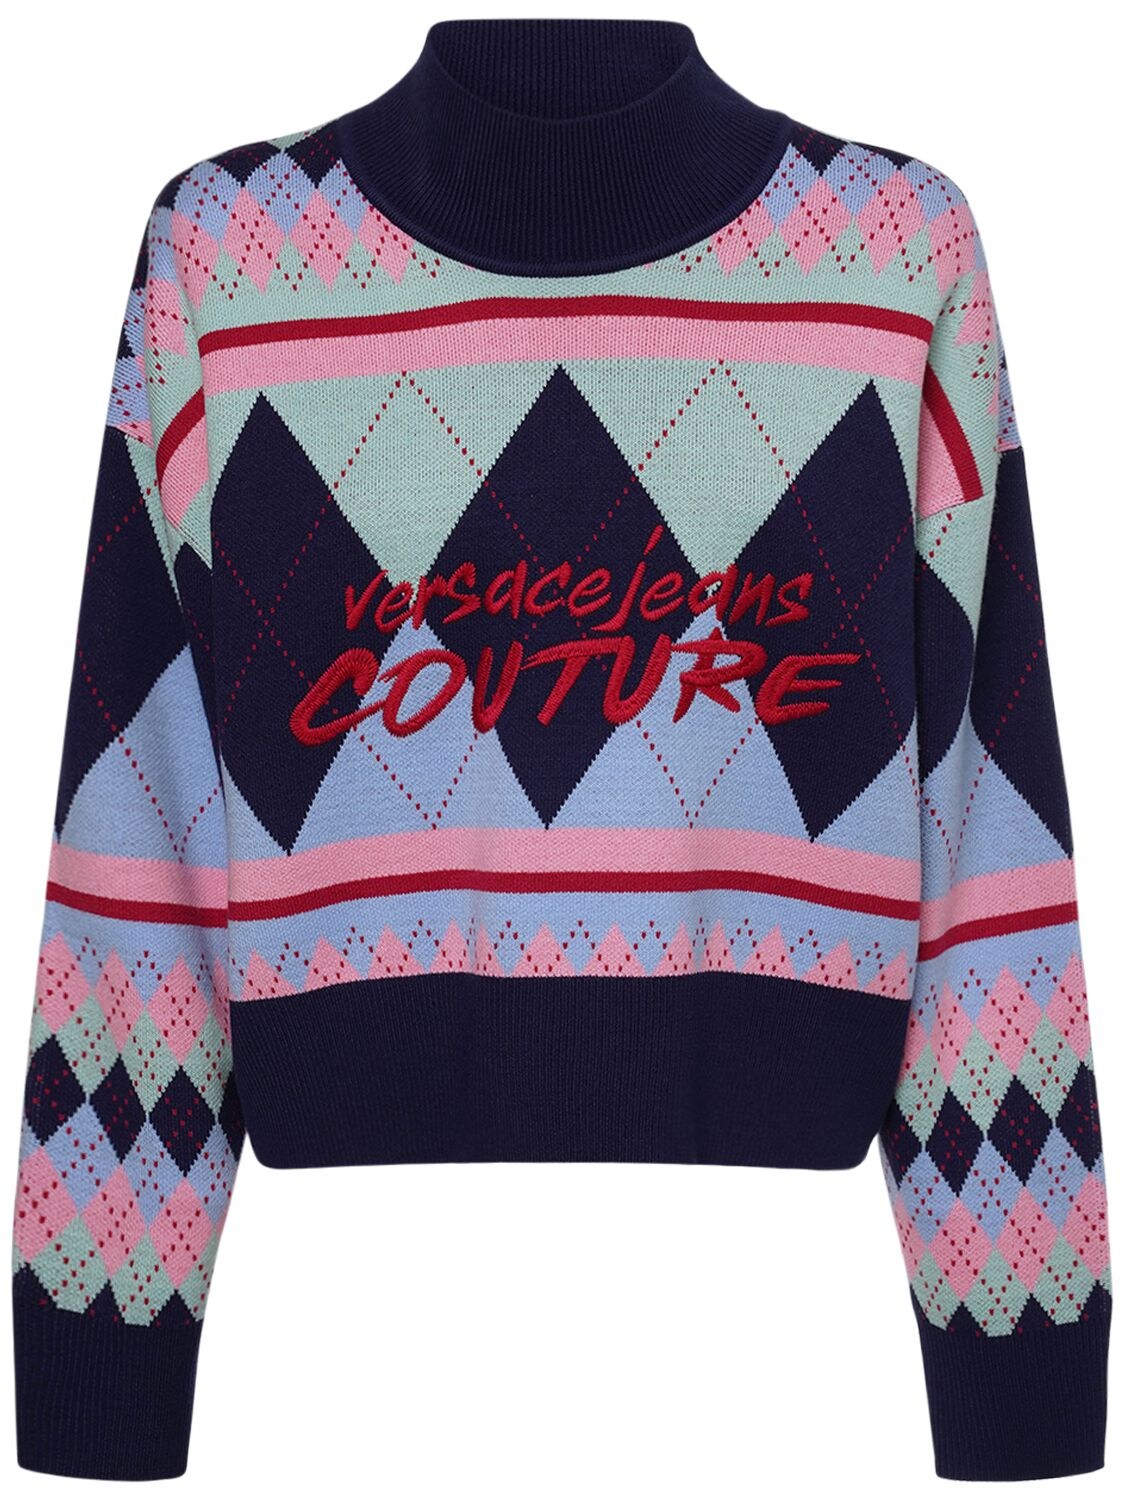 VERSACE JEANS COUTURE ARGYLE KNIT WOOL BLEND SWEATER